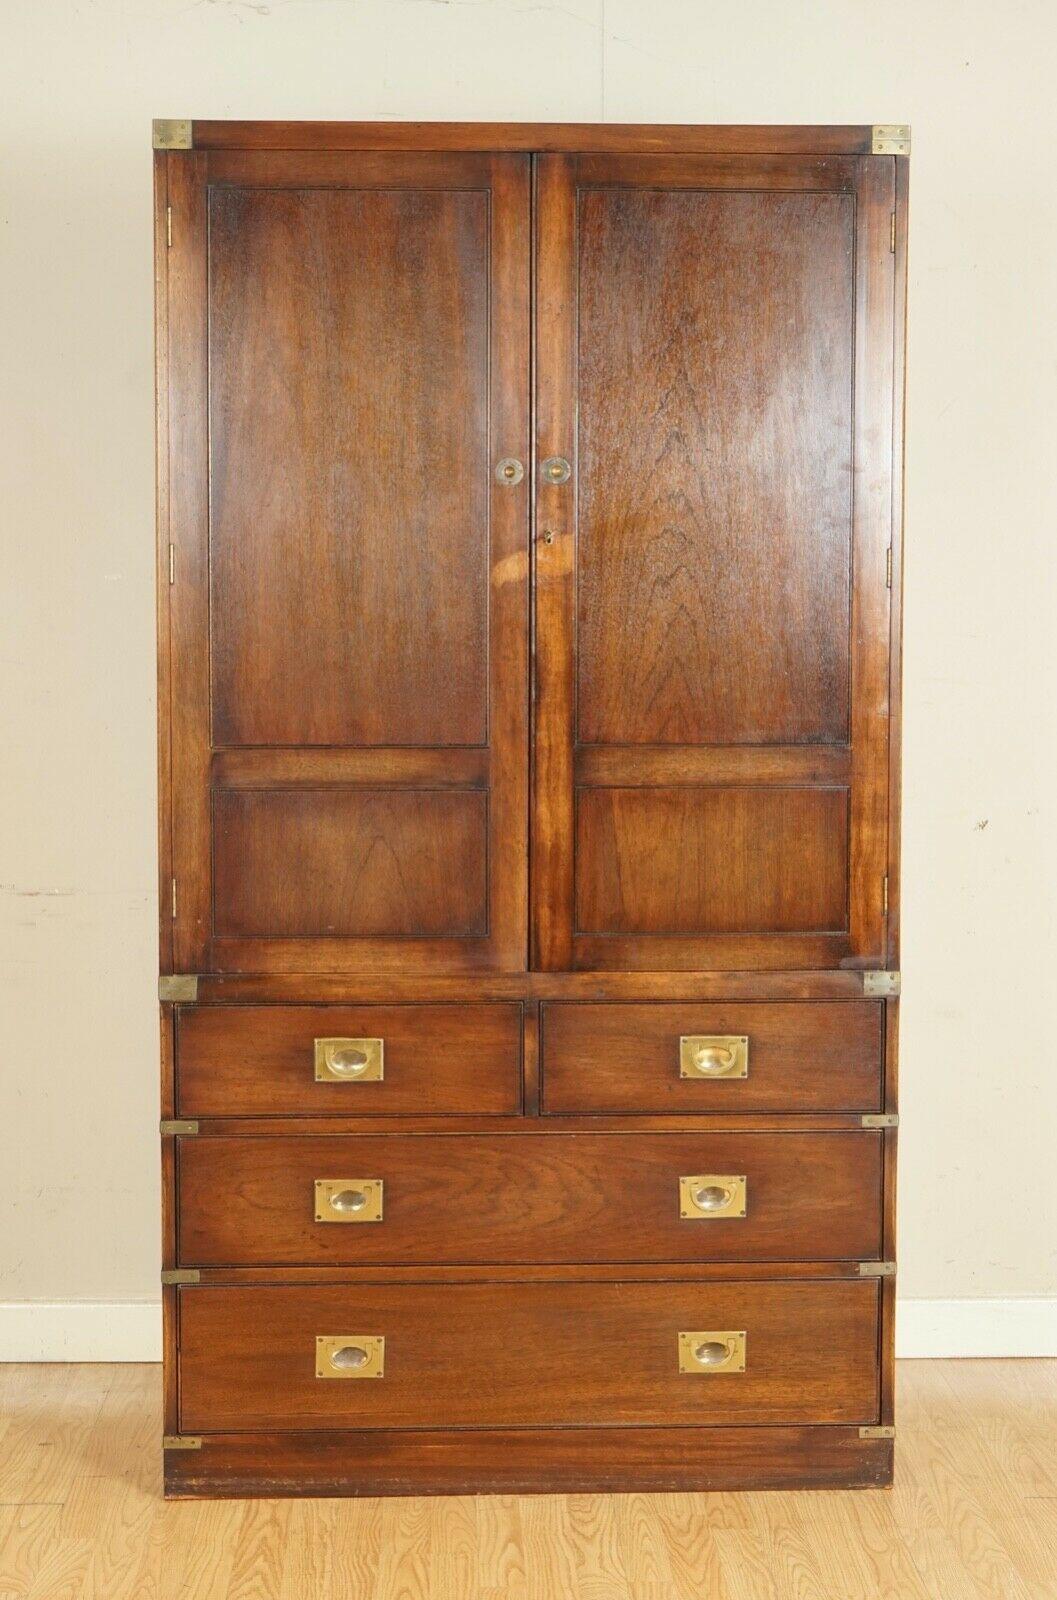 We are so excited to present to you this outstanding Bevan Funnel Military Campaign Wardrobe.

The wardrobe features a rail inside to hang your clothes, a removable shelf which was put by the previous owner as she used it to store her books and